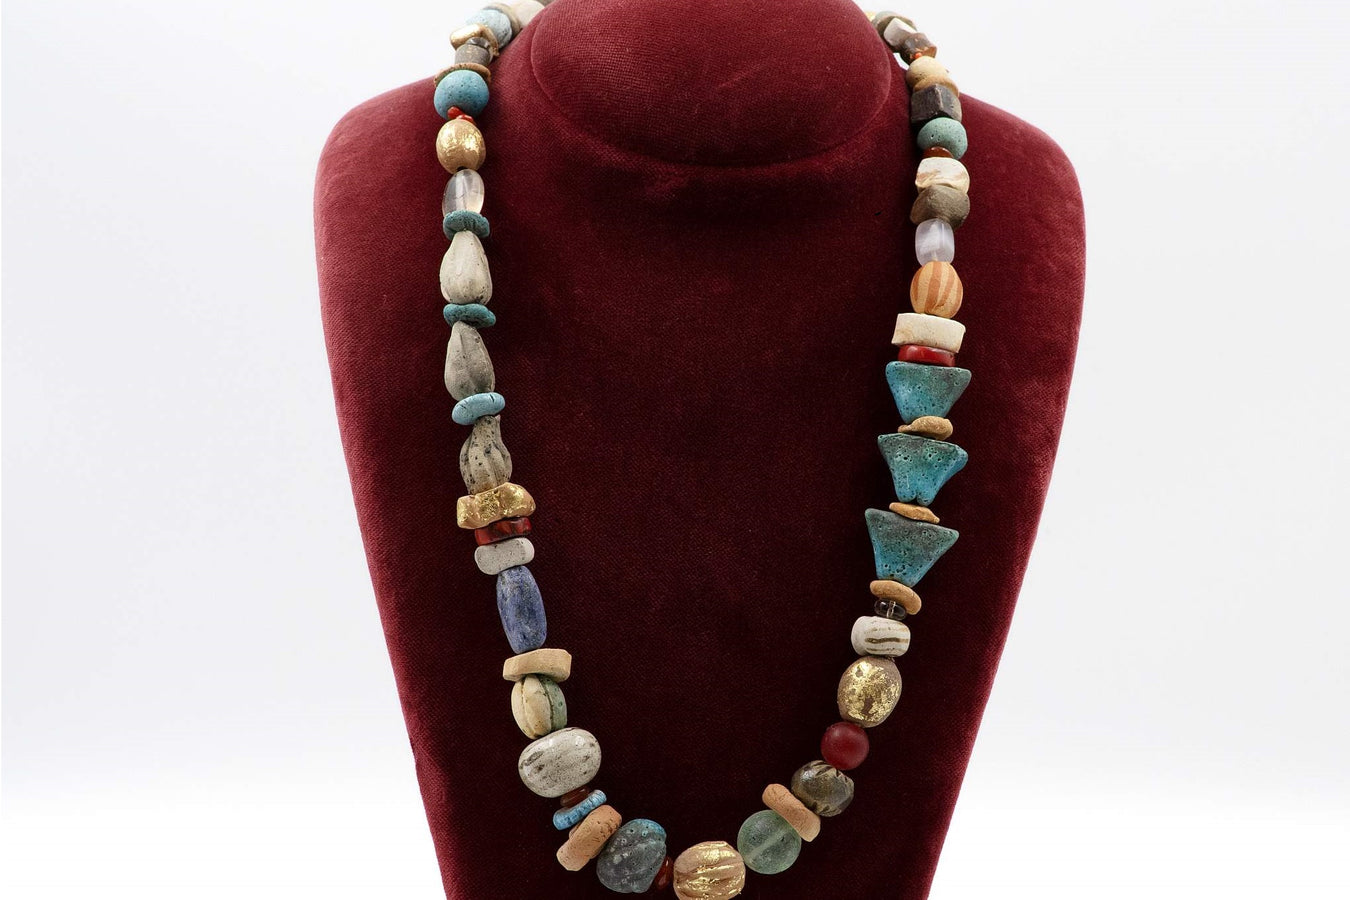 Unique necklace with hand made colorful plain or glazed or gilded ceramic beads, glass, coral and lapis decorative elements